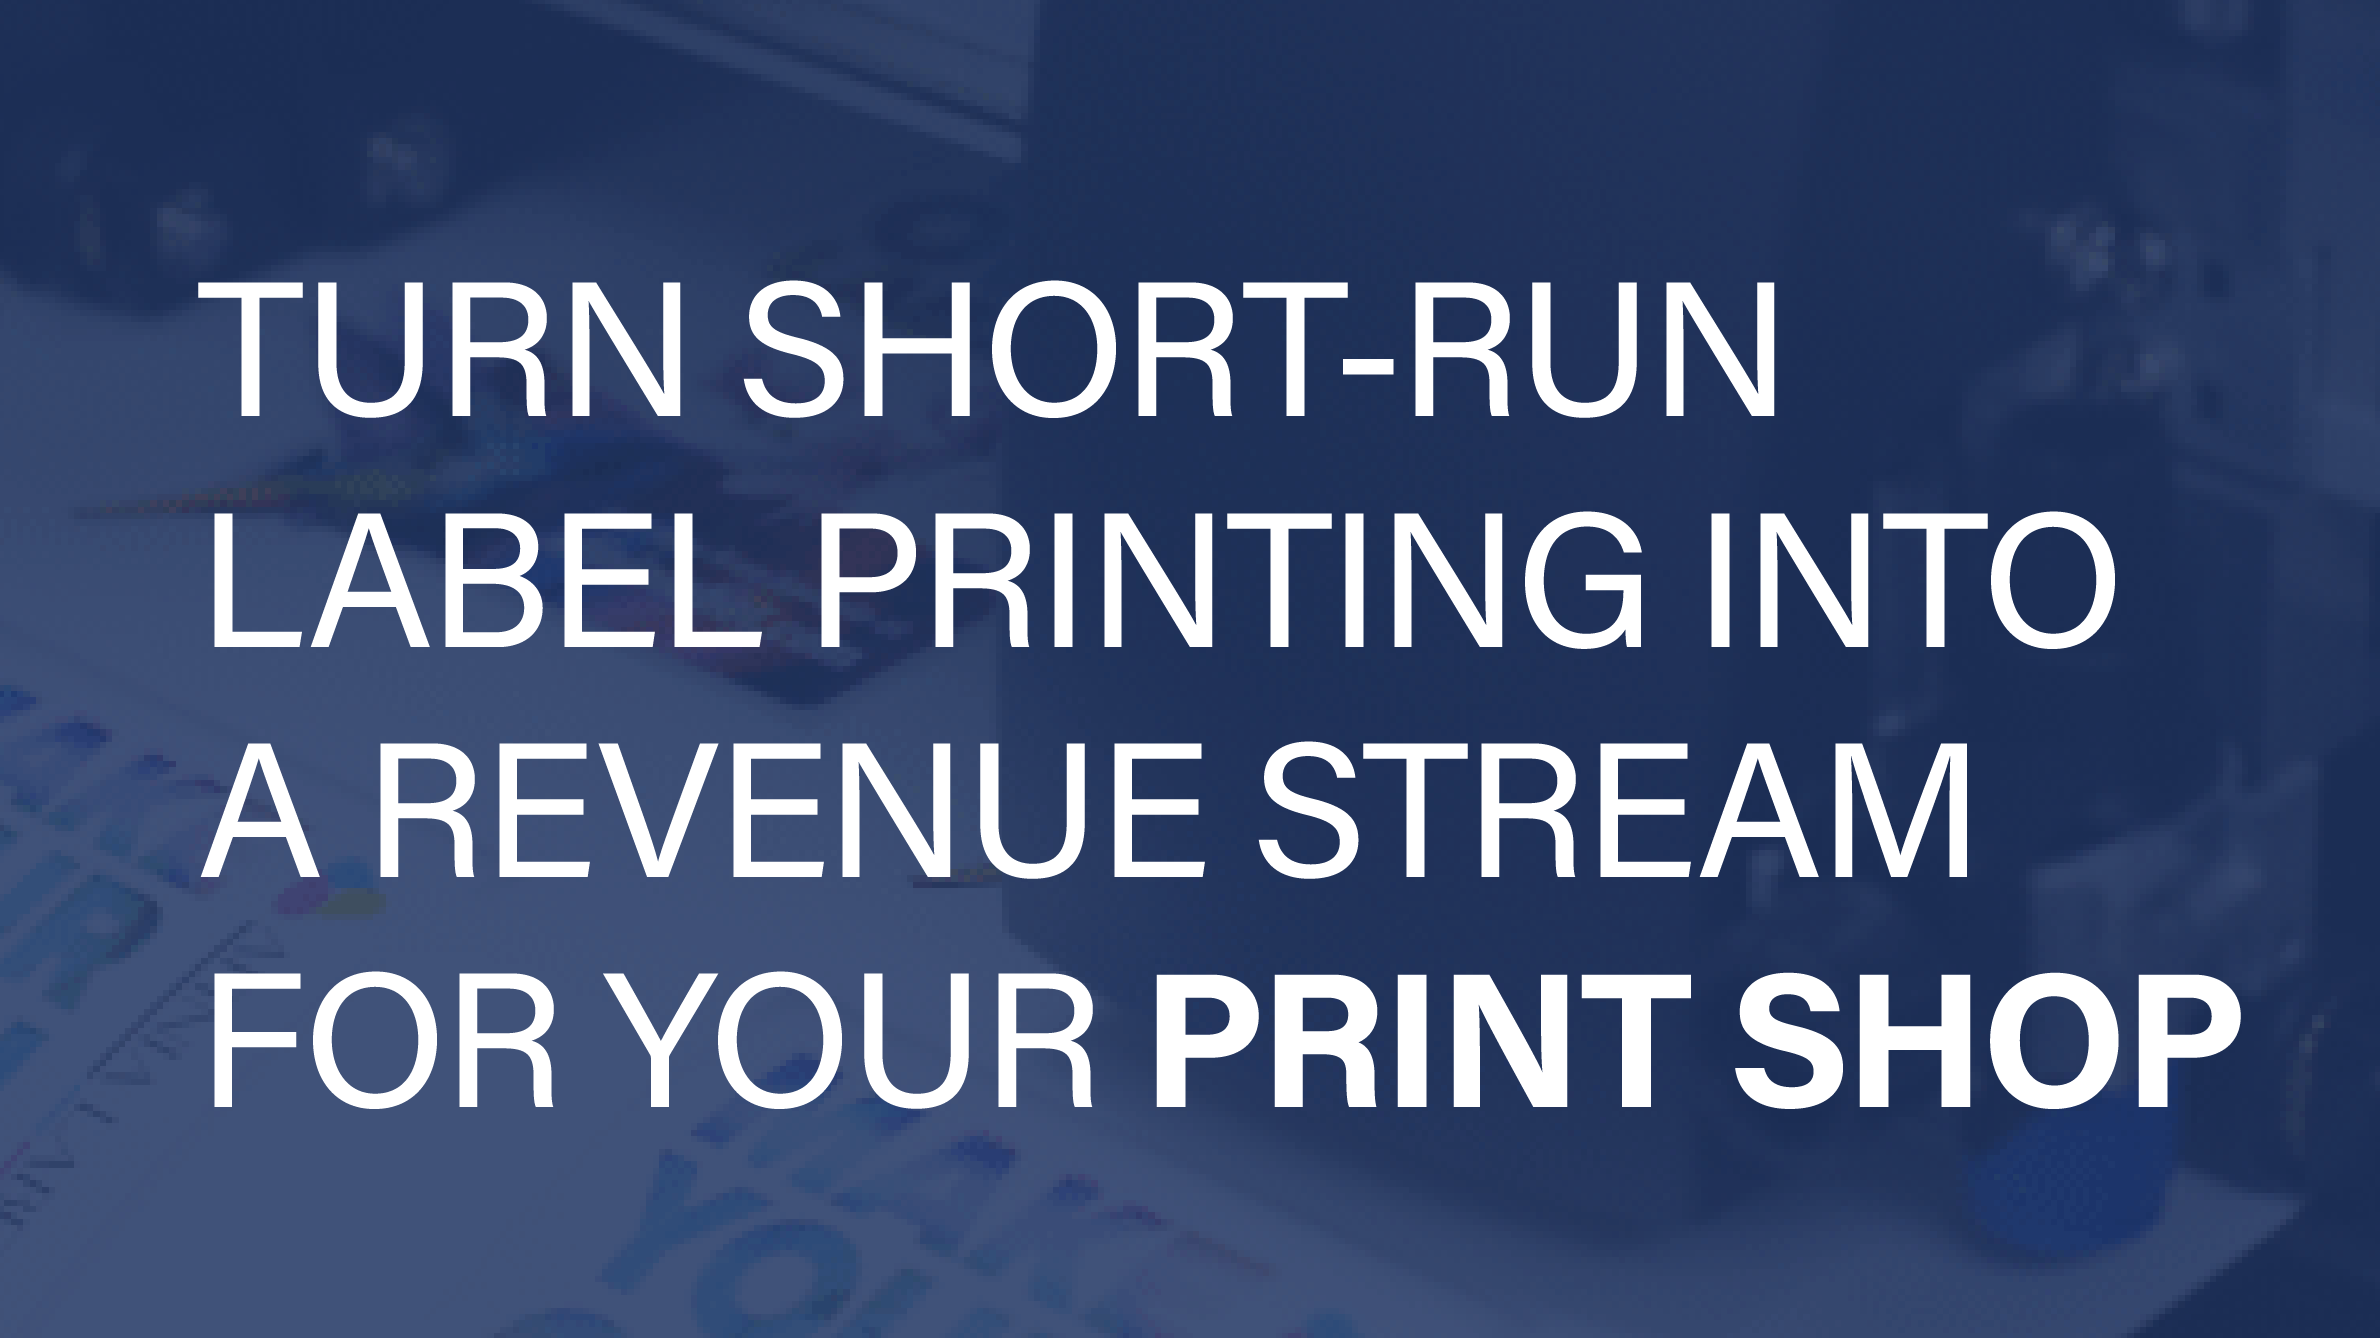 Turn Short-Run Label Printing into a Revenue Stream for your Print Shop